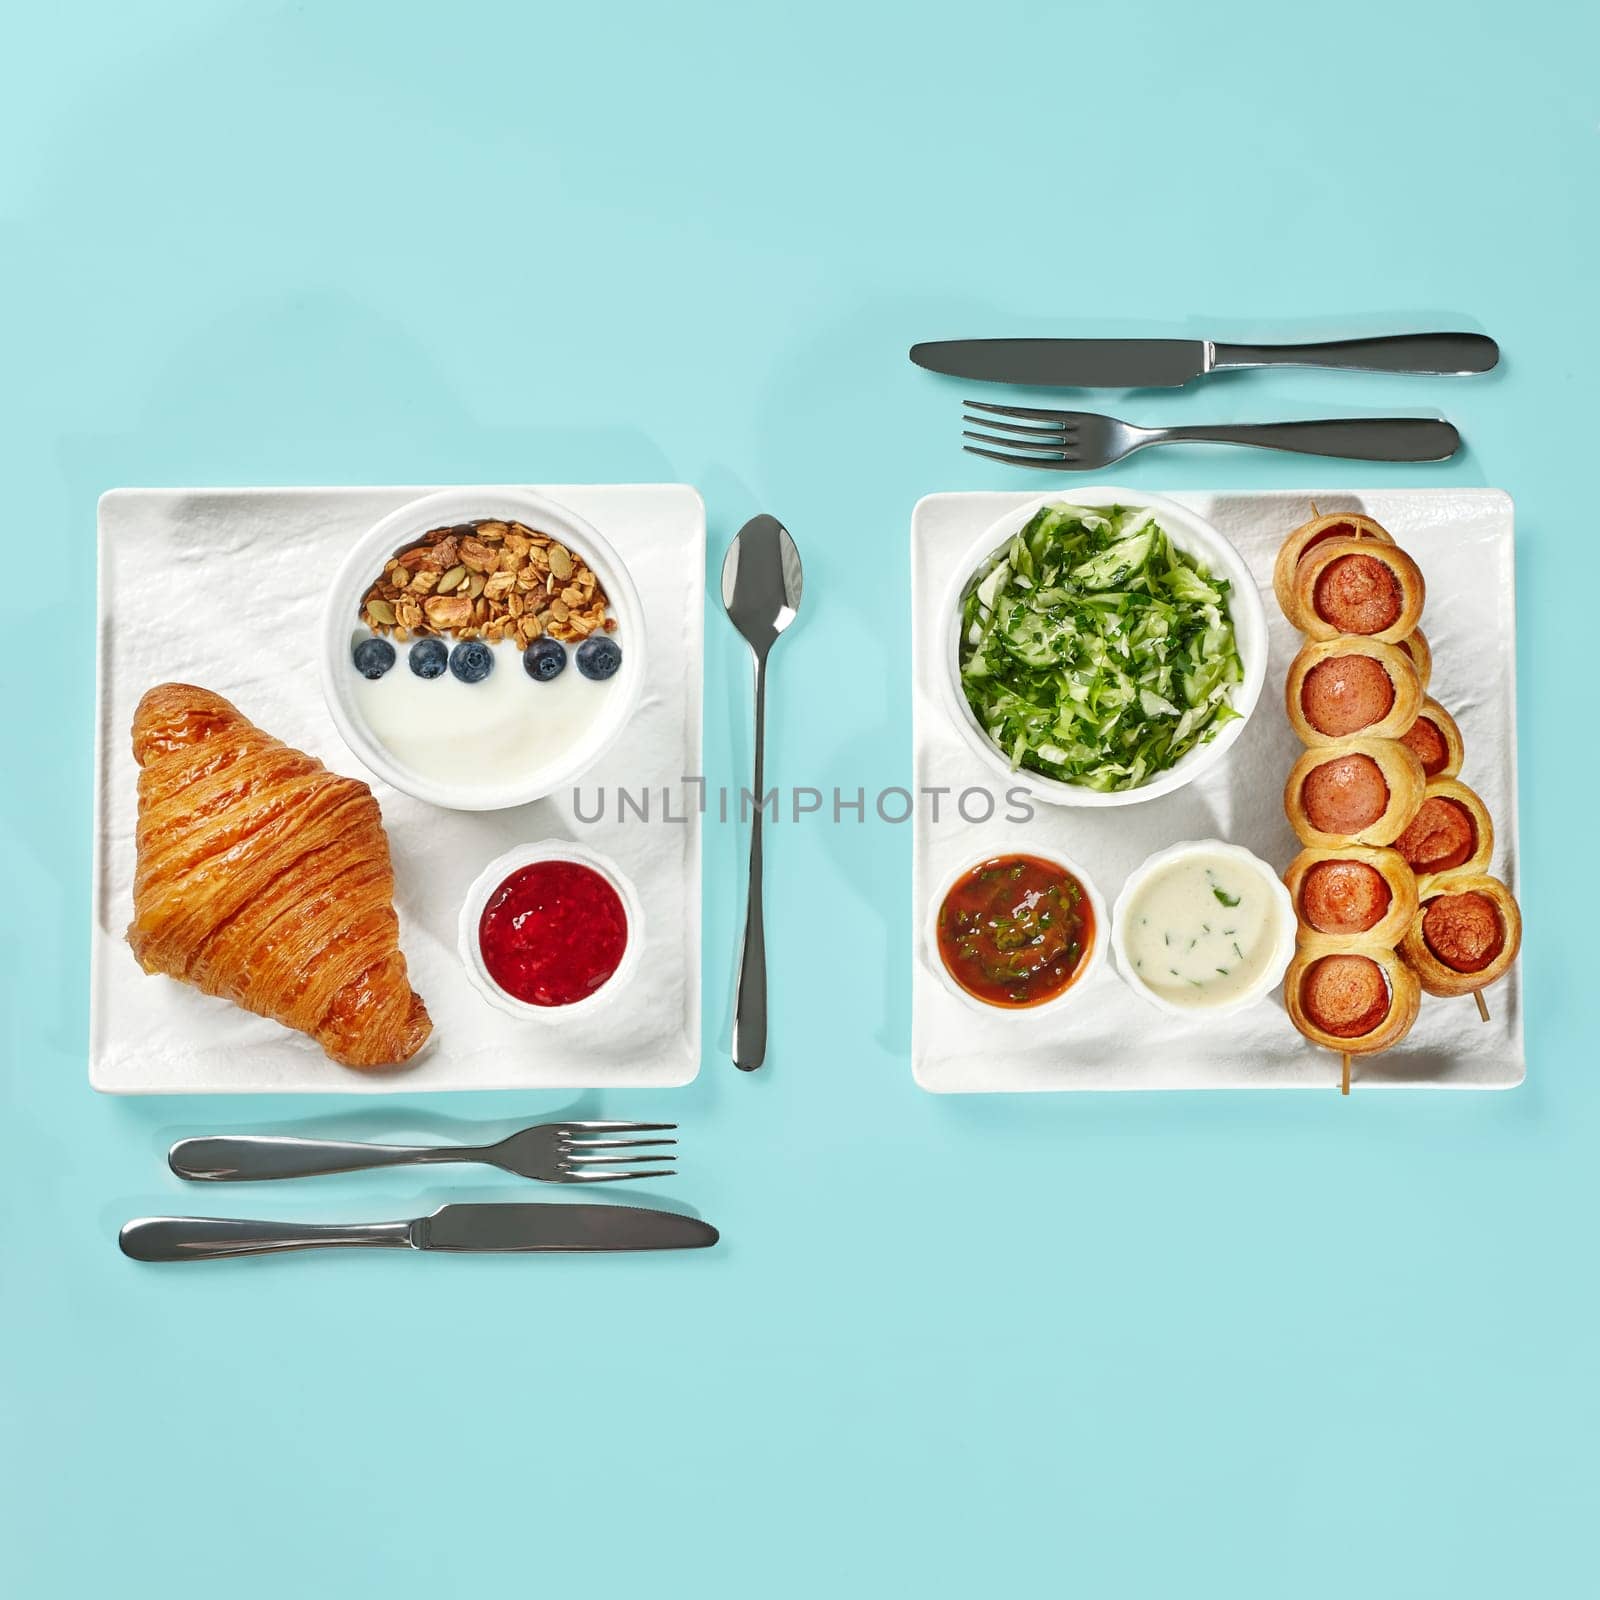 Two breakfast choices presented side by side on blue background by nazarovsergey